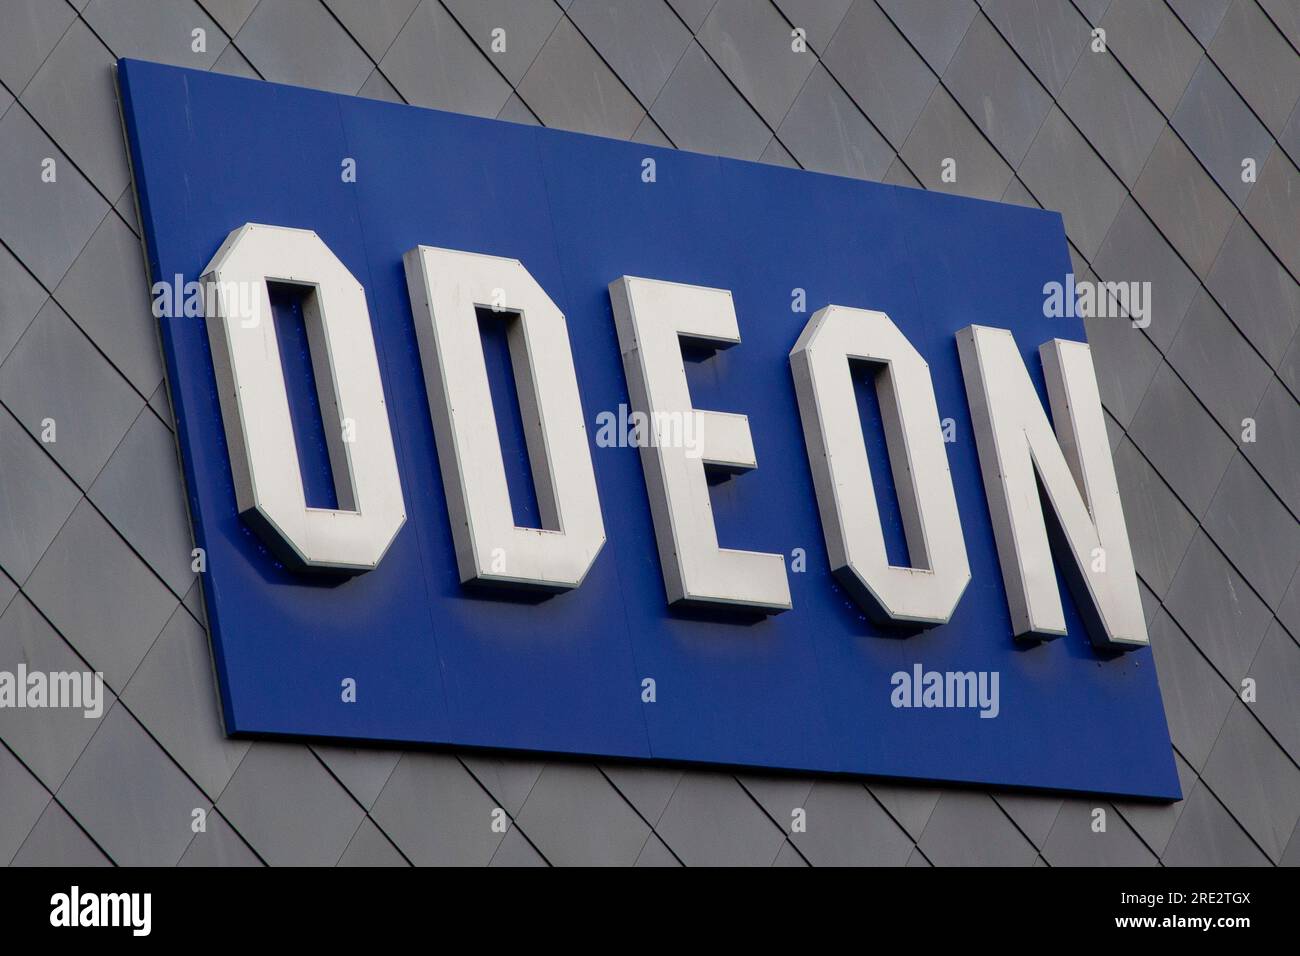 Odean Cinema Sign in Trowbridge, Whiltshire Stock Photo